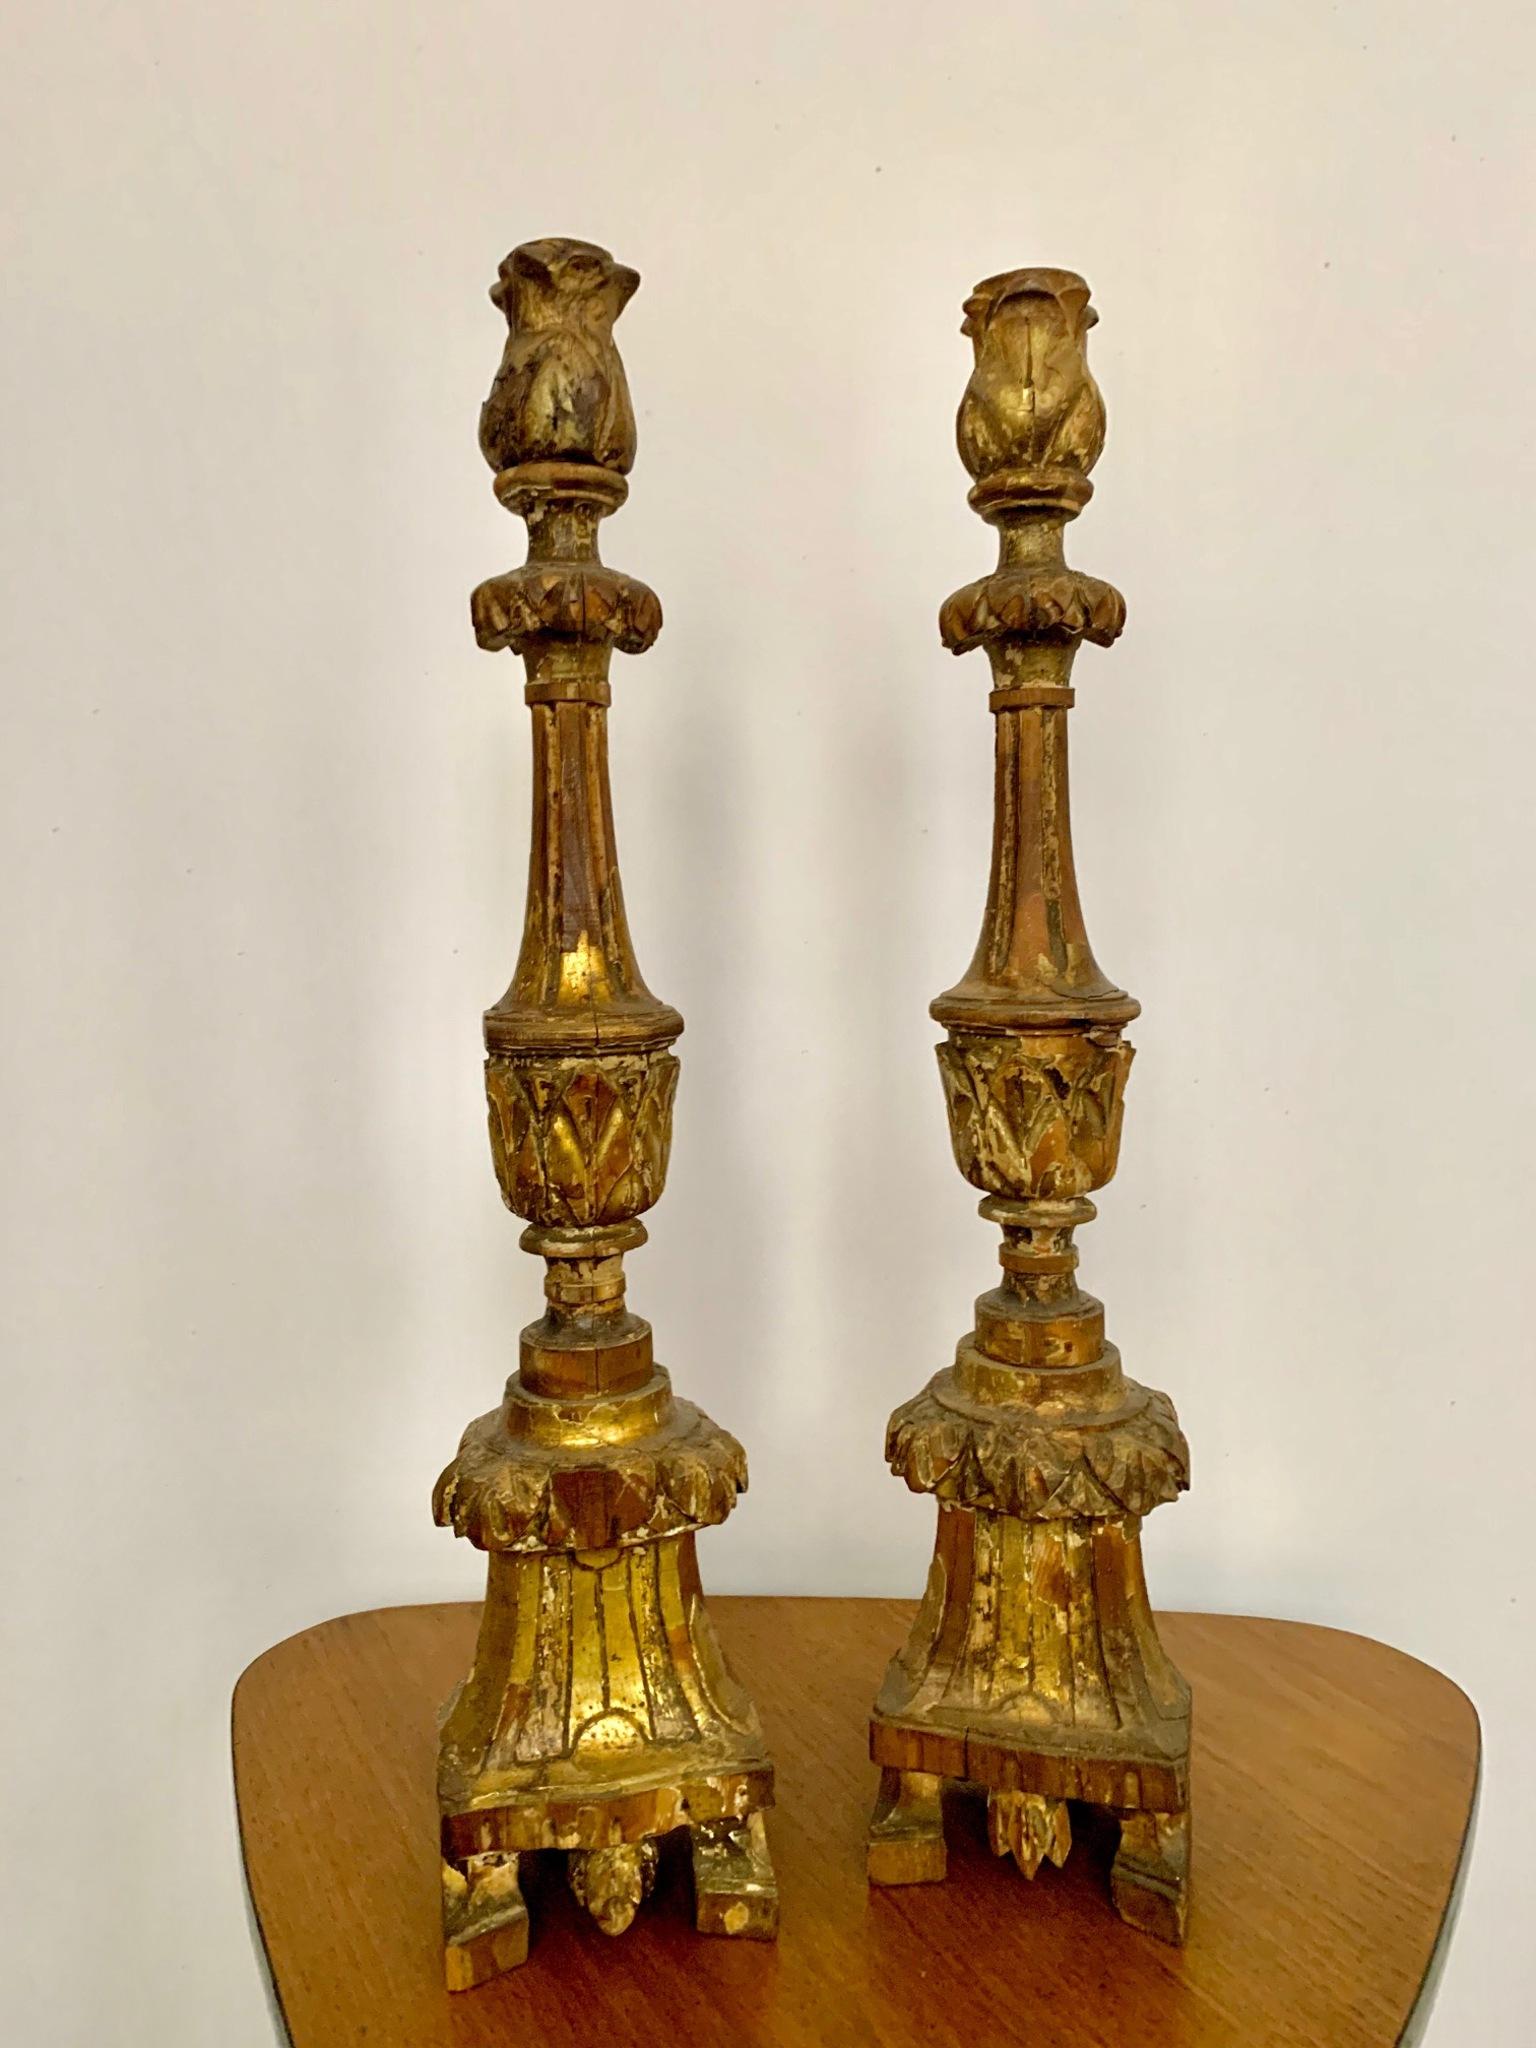 Pair of torchères in gilded and carved wood, dated from the middle of the 18th century in Portuguese, the base is a triangular shape that rests on three small feet.
retains its original patina.